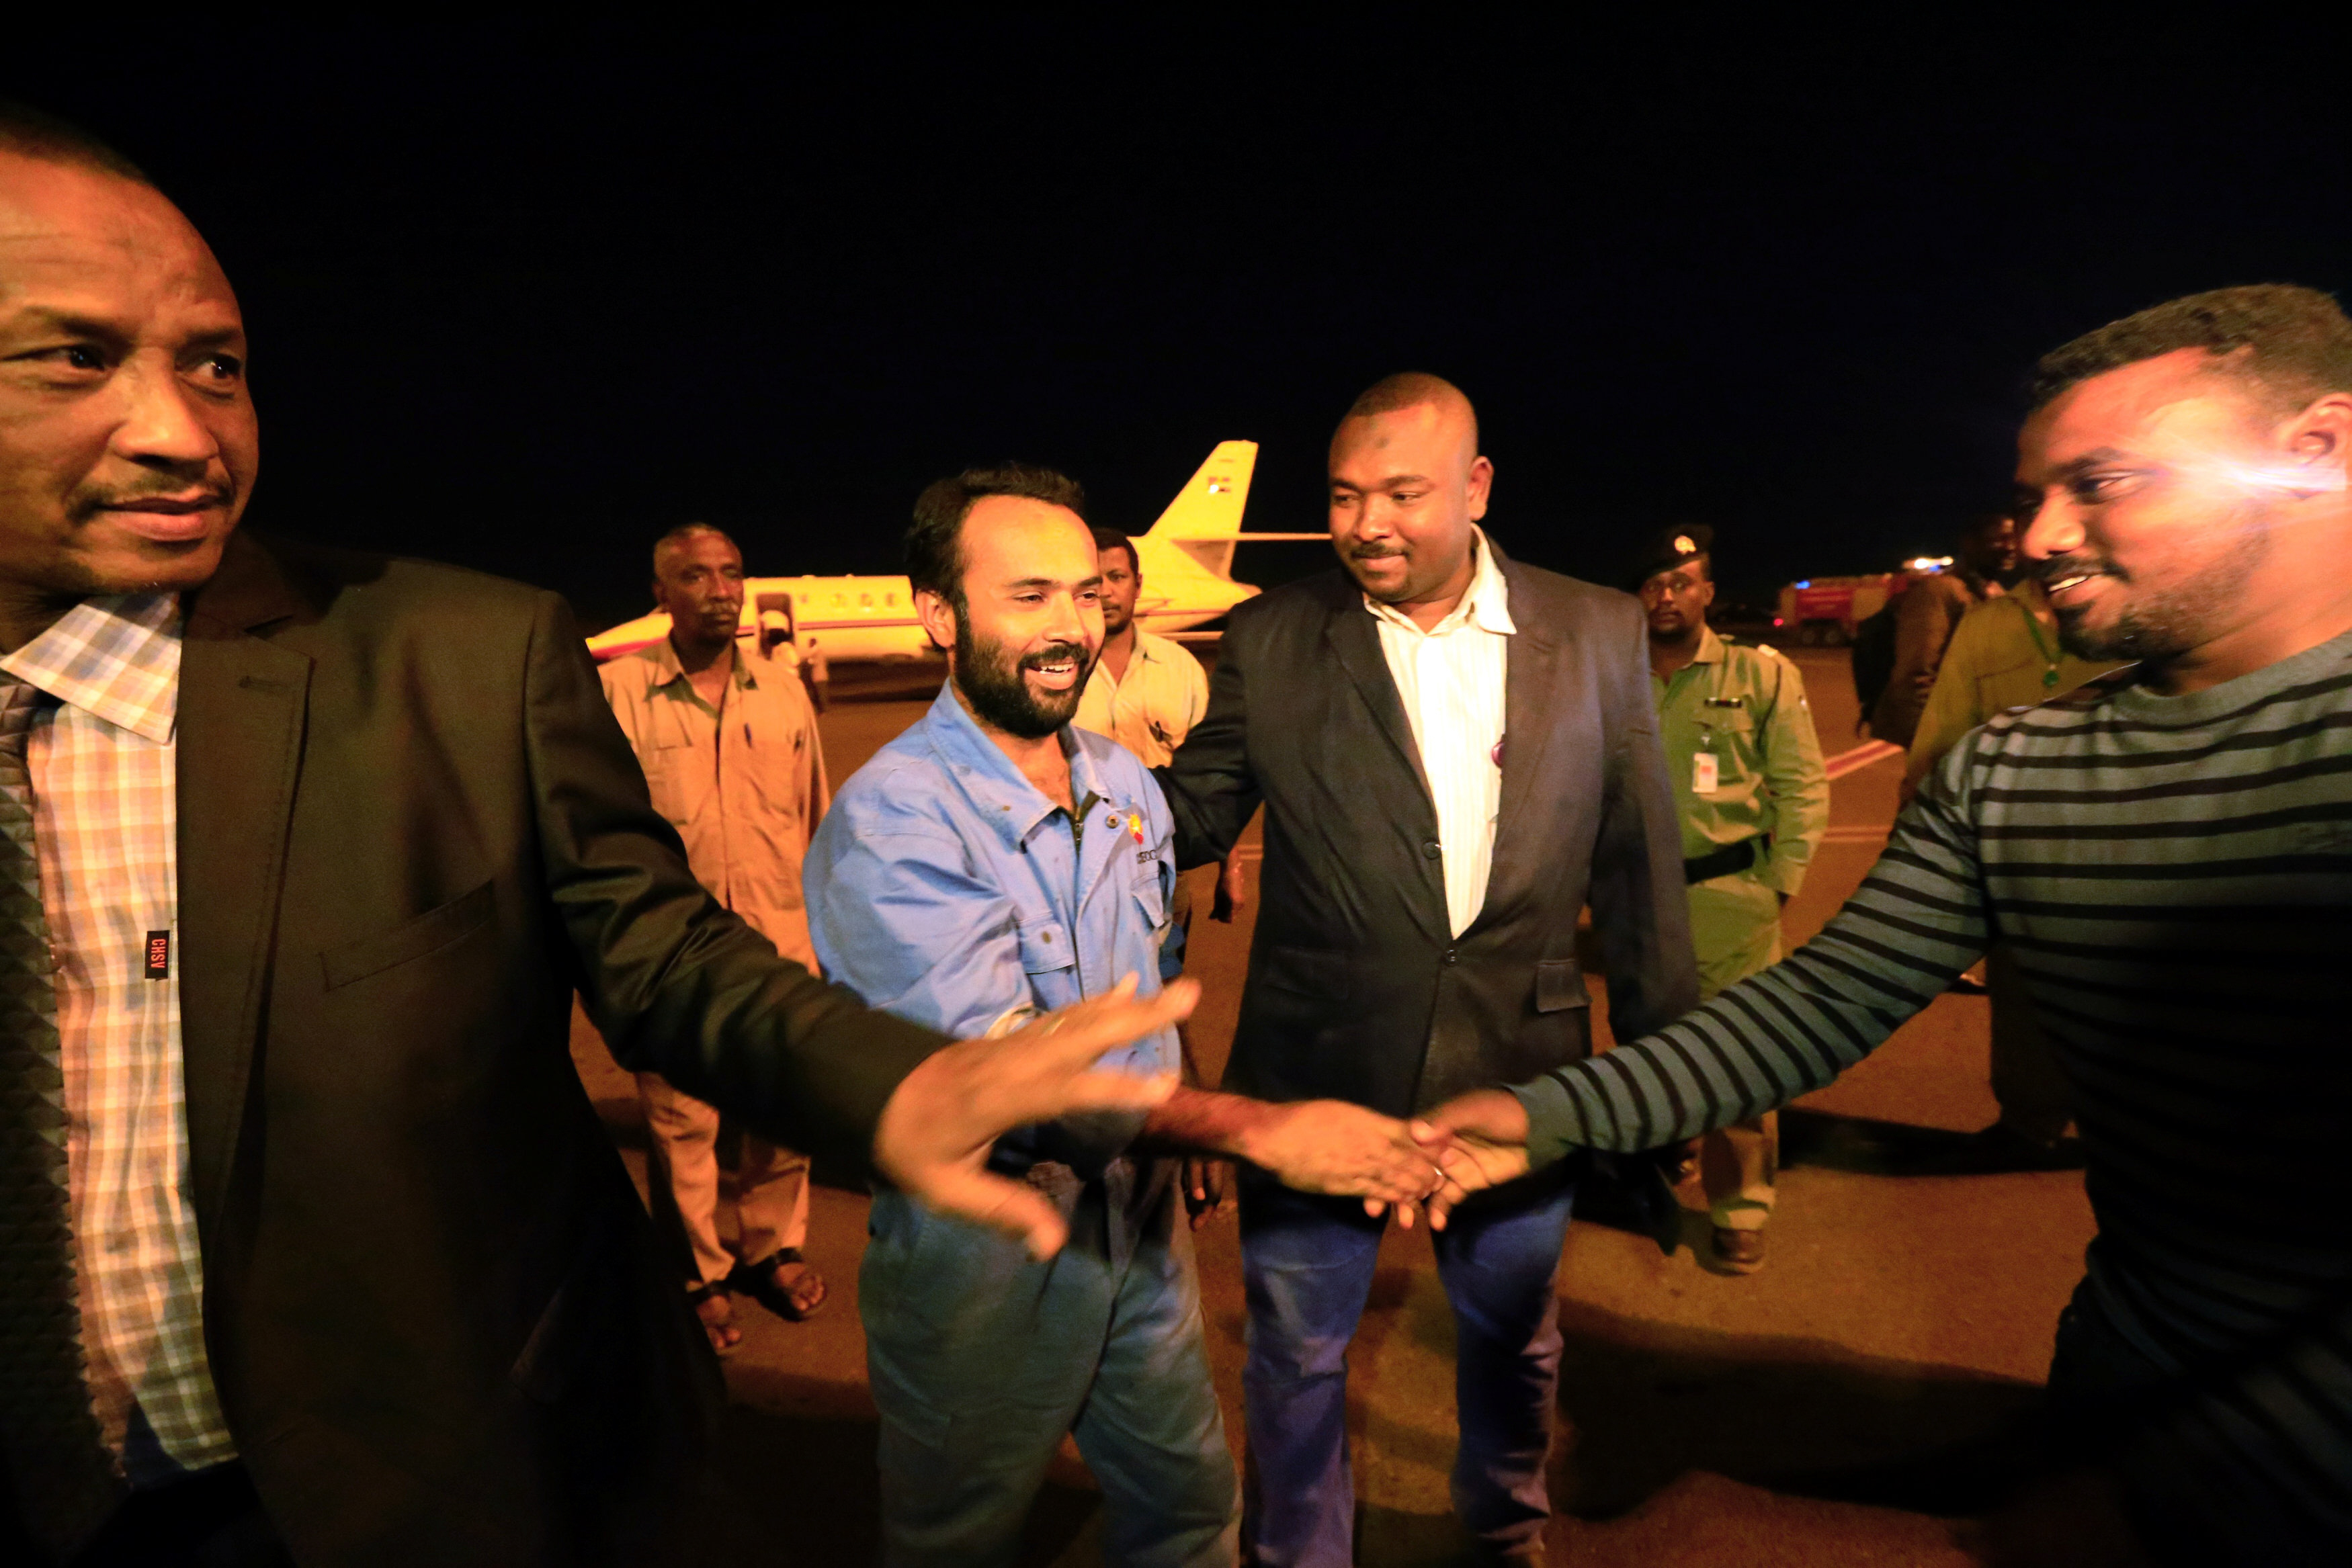 ayaz jamali who was kidnapped by rebels in south sudan was welcomed as he arrives after being release at khartoum airport photo reuters